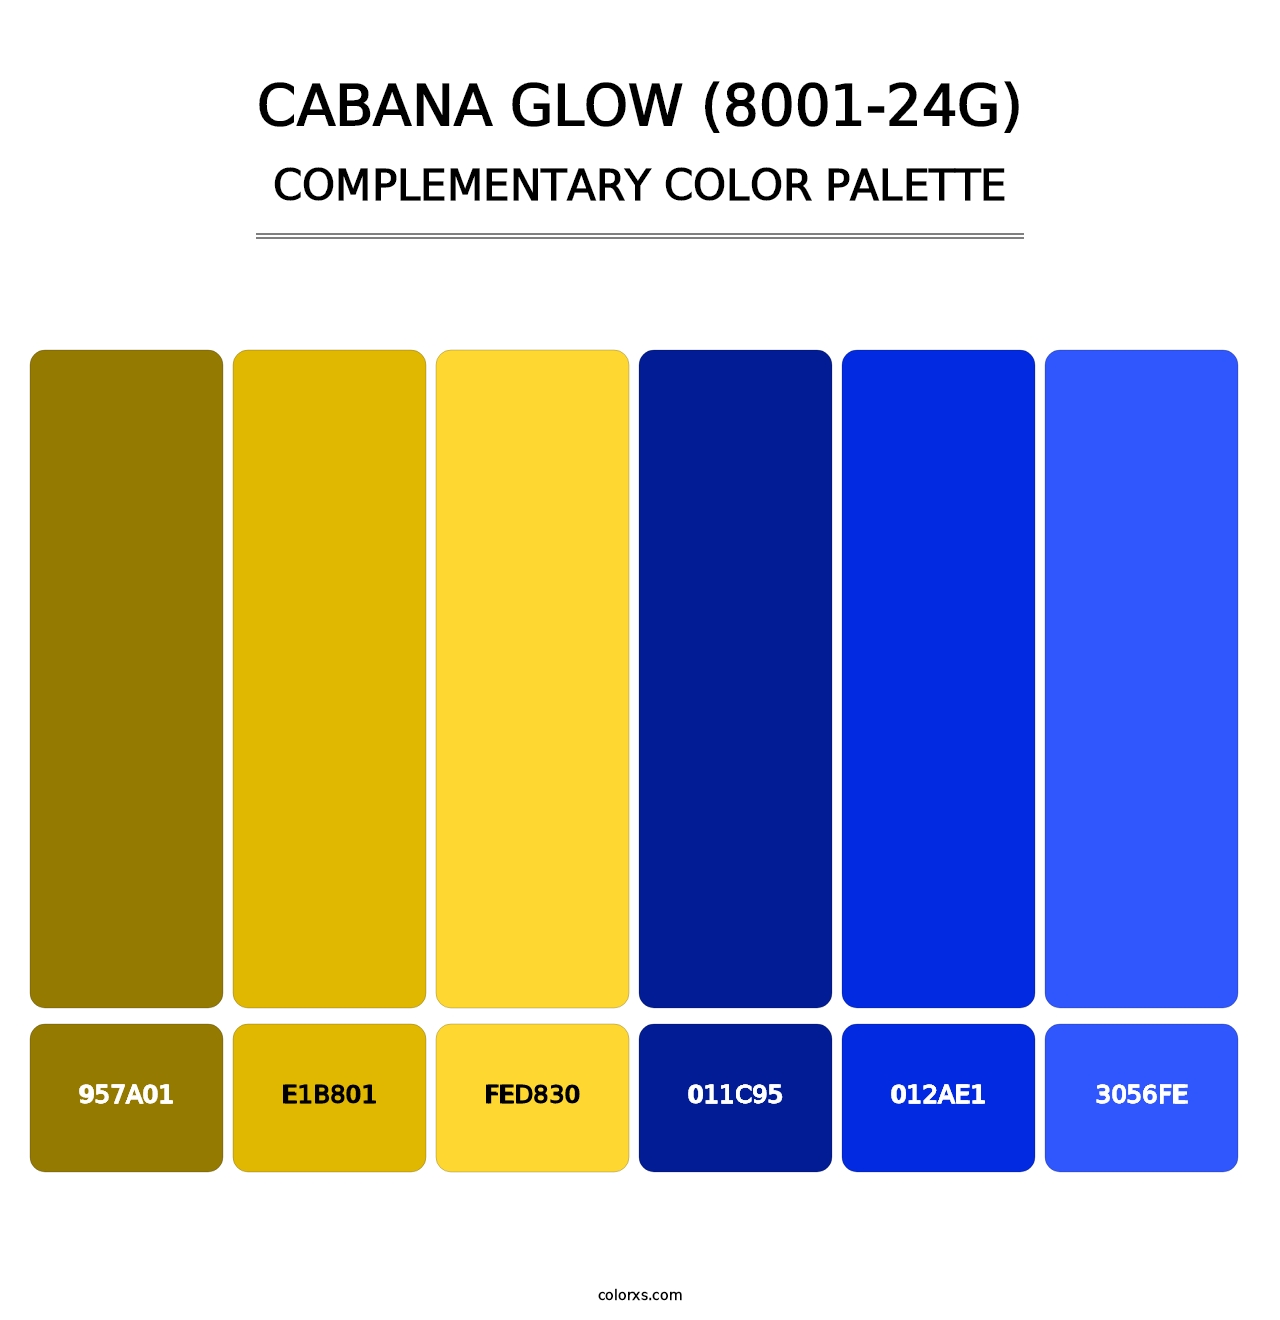 Cabana Glow (8001-24G) - Complementary Color Palette